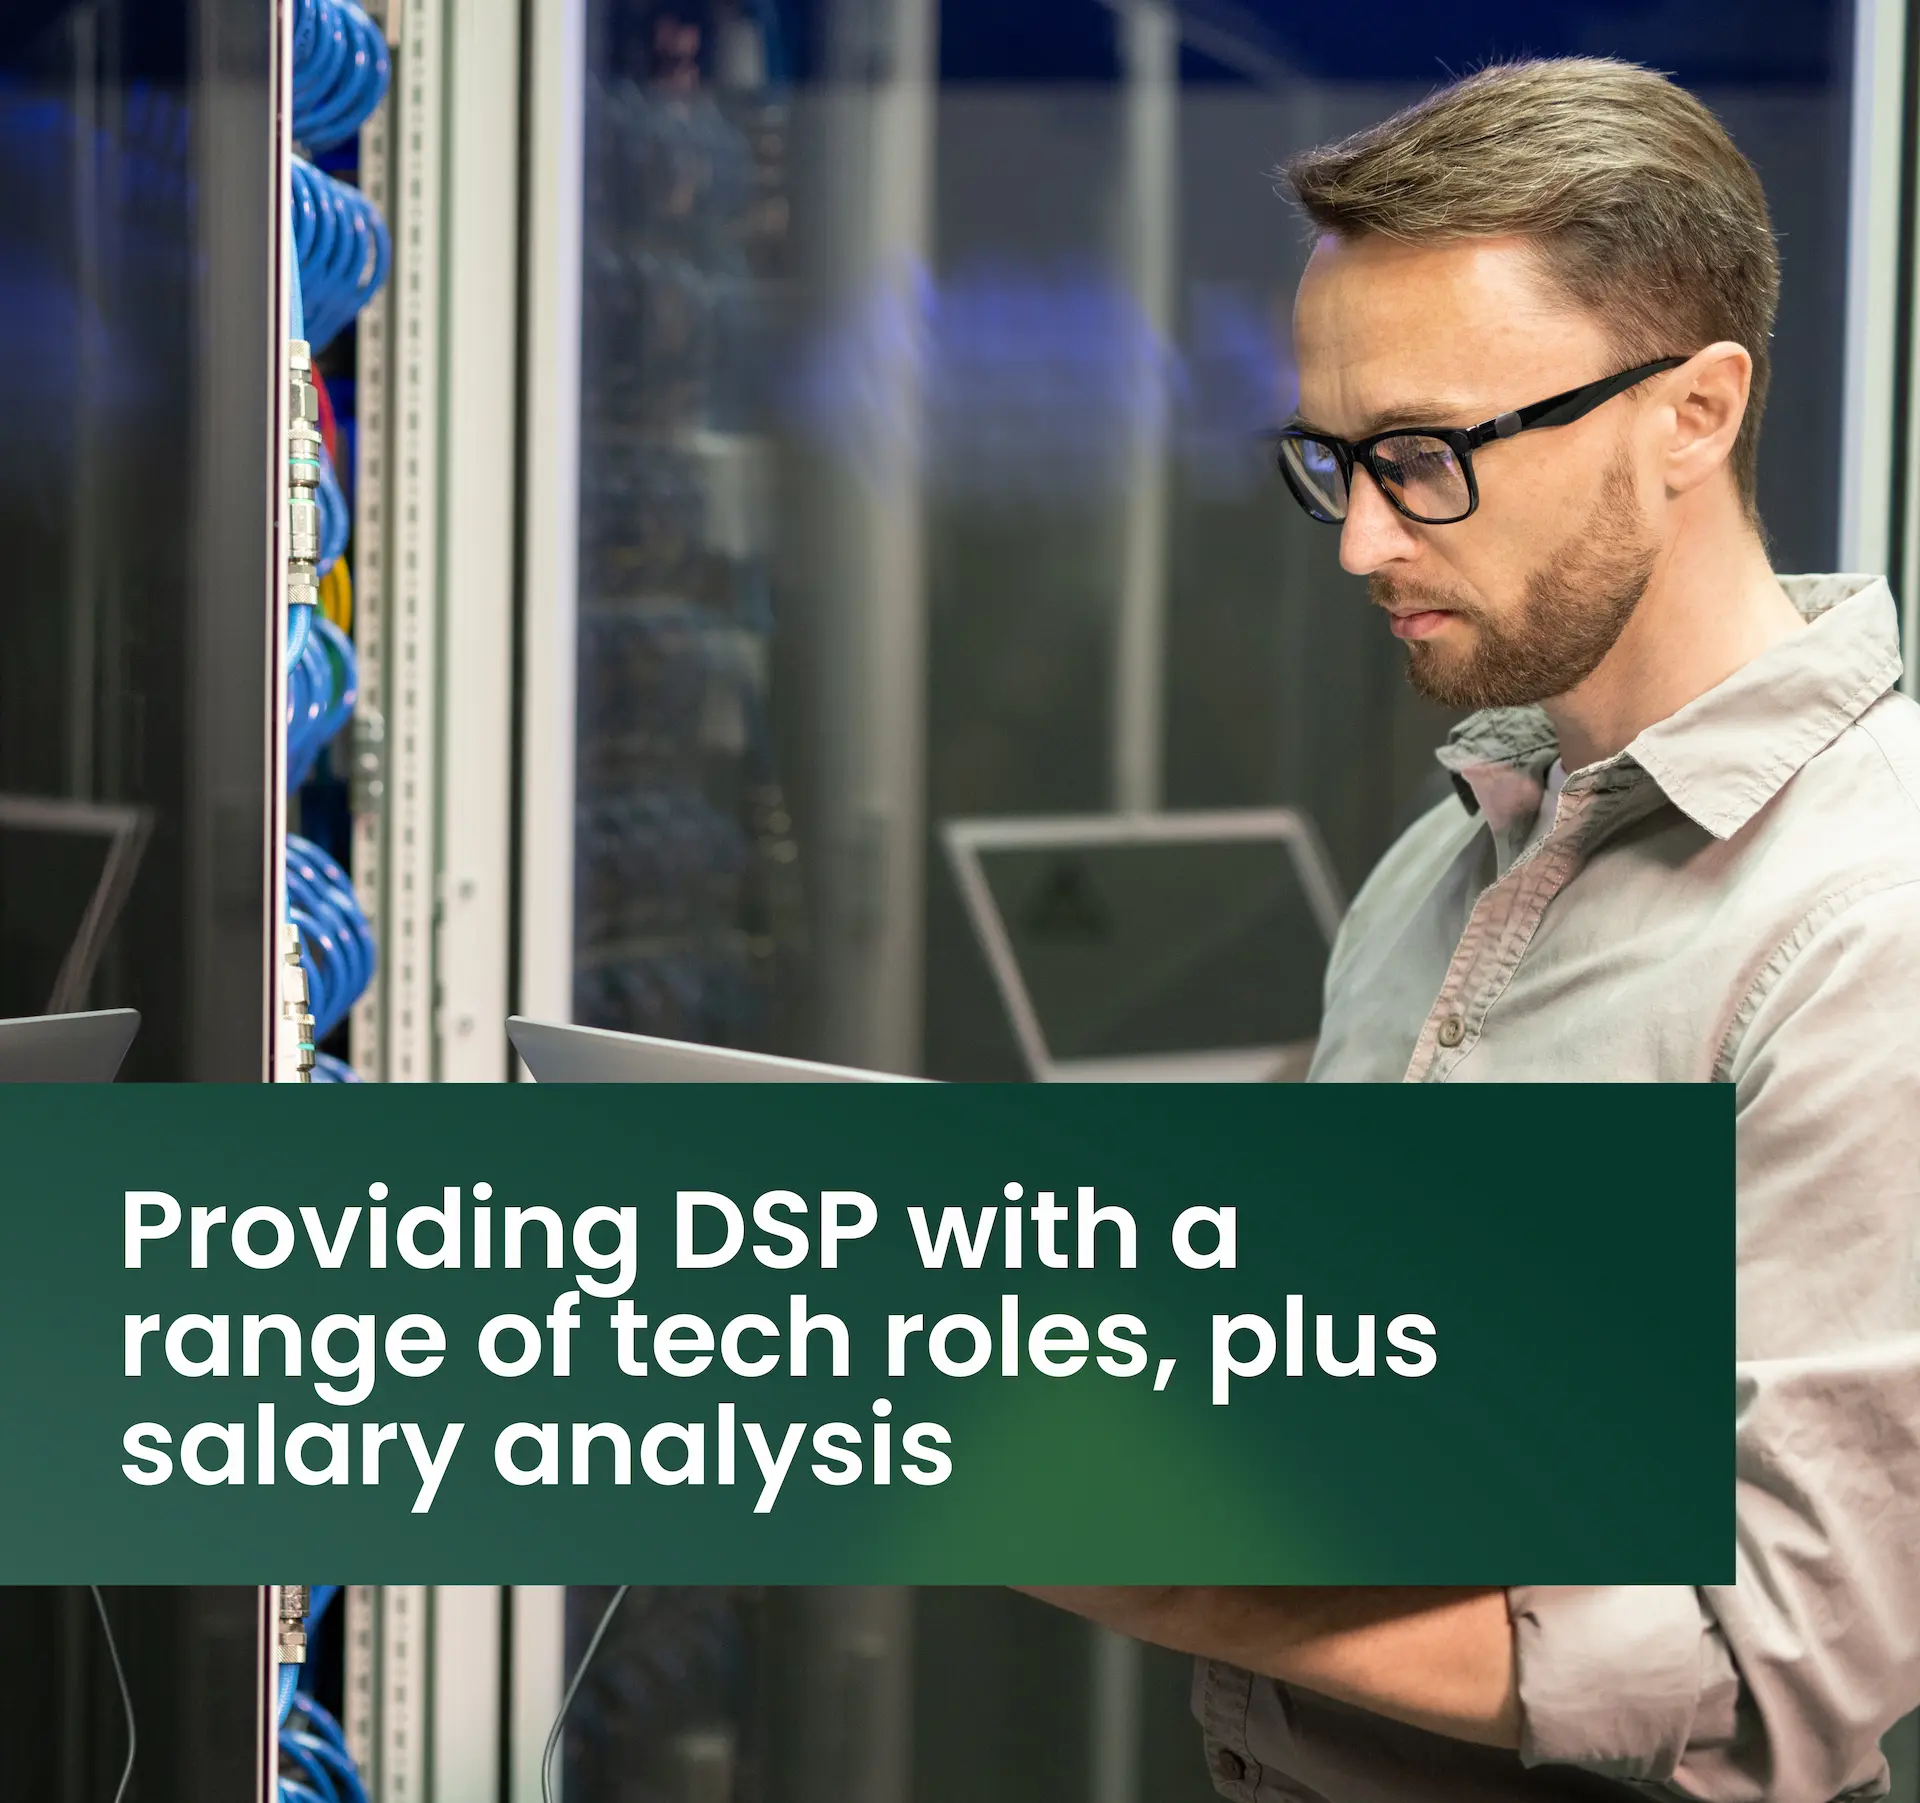 Providing DSP with a range of tech roles, plus salary analysis